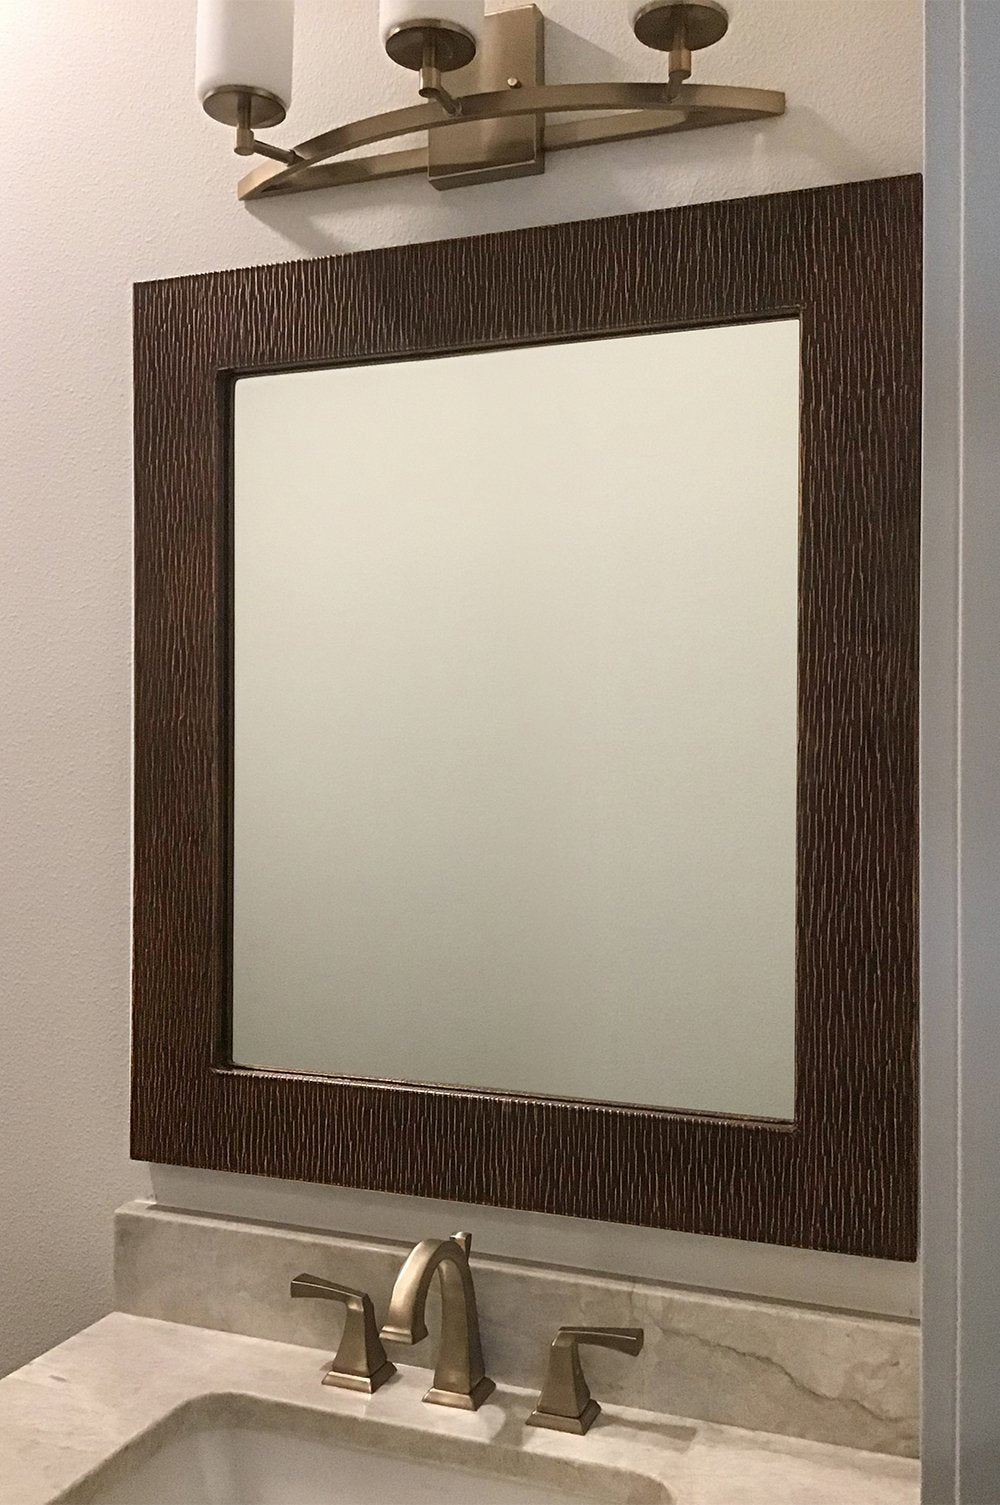 36" Rectangle Hammered Copper Mirror with Tree Design in a modern style farmhouse bathroom